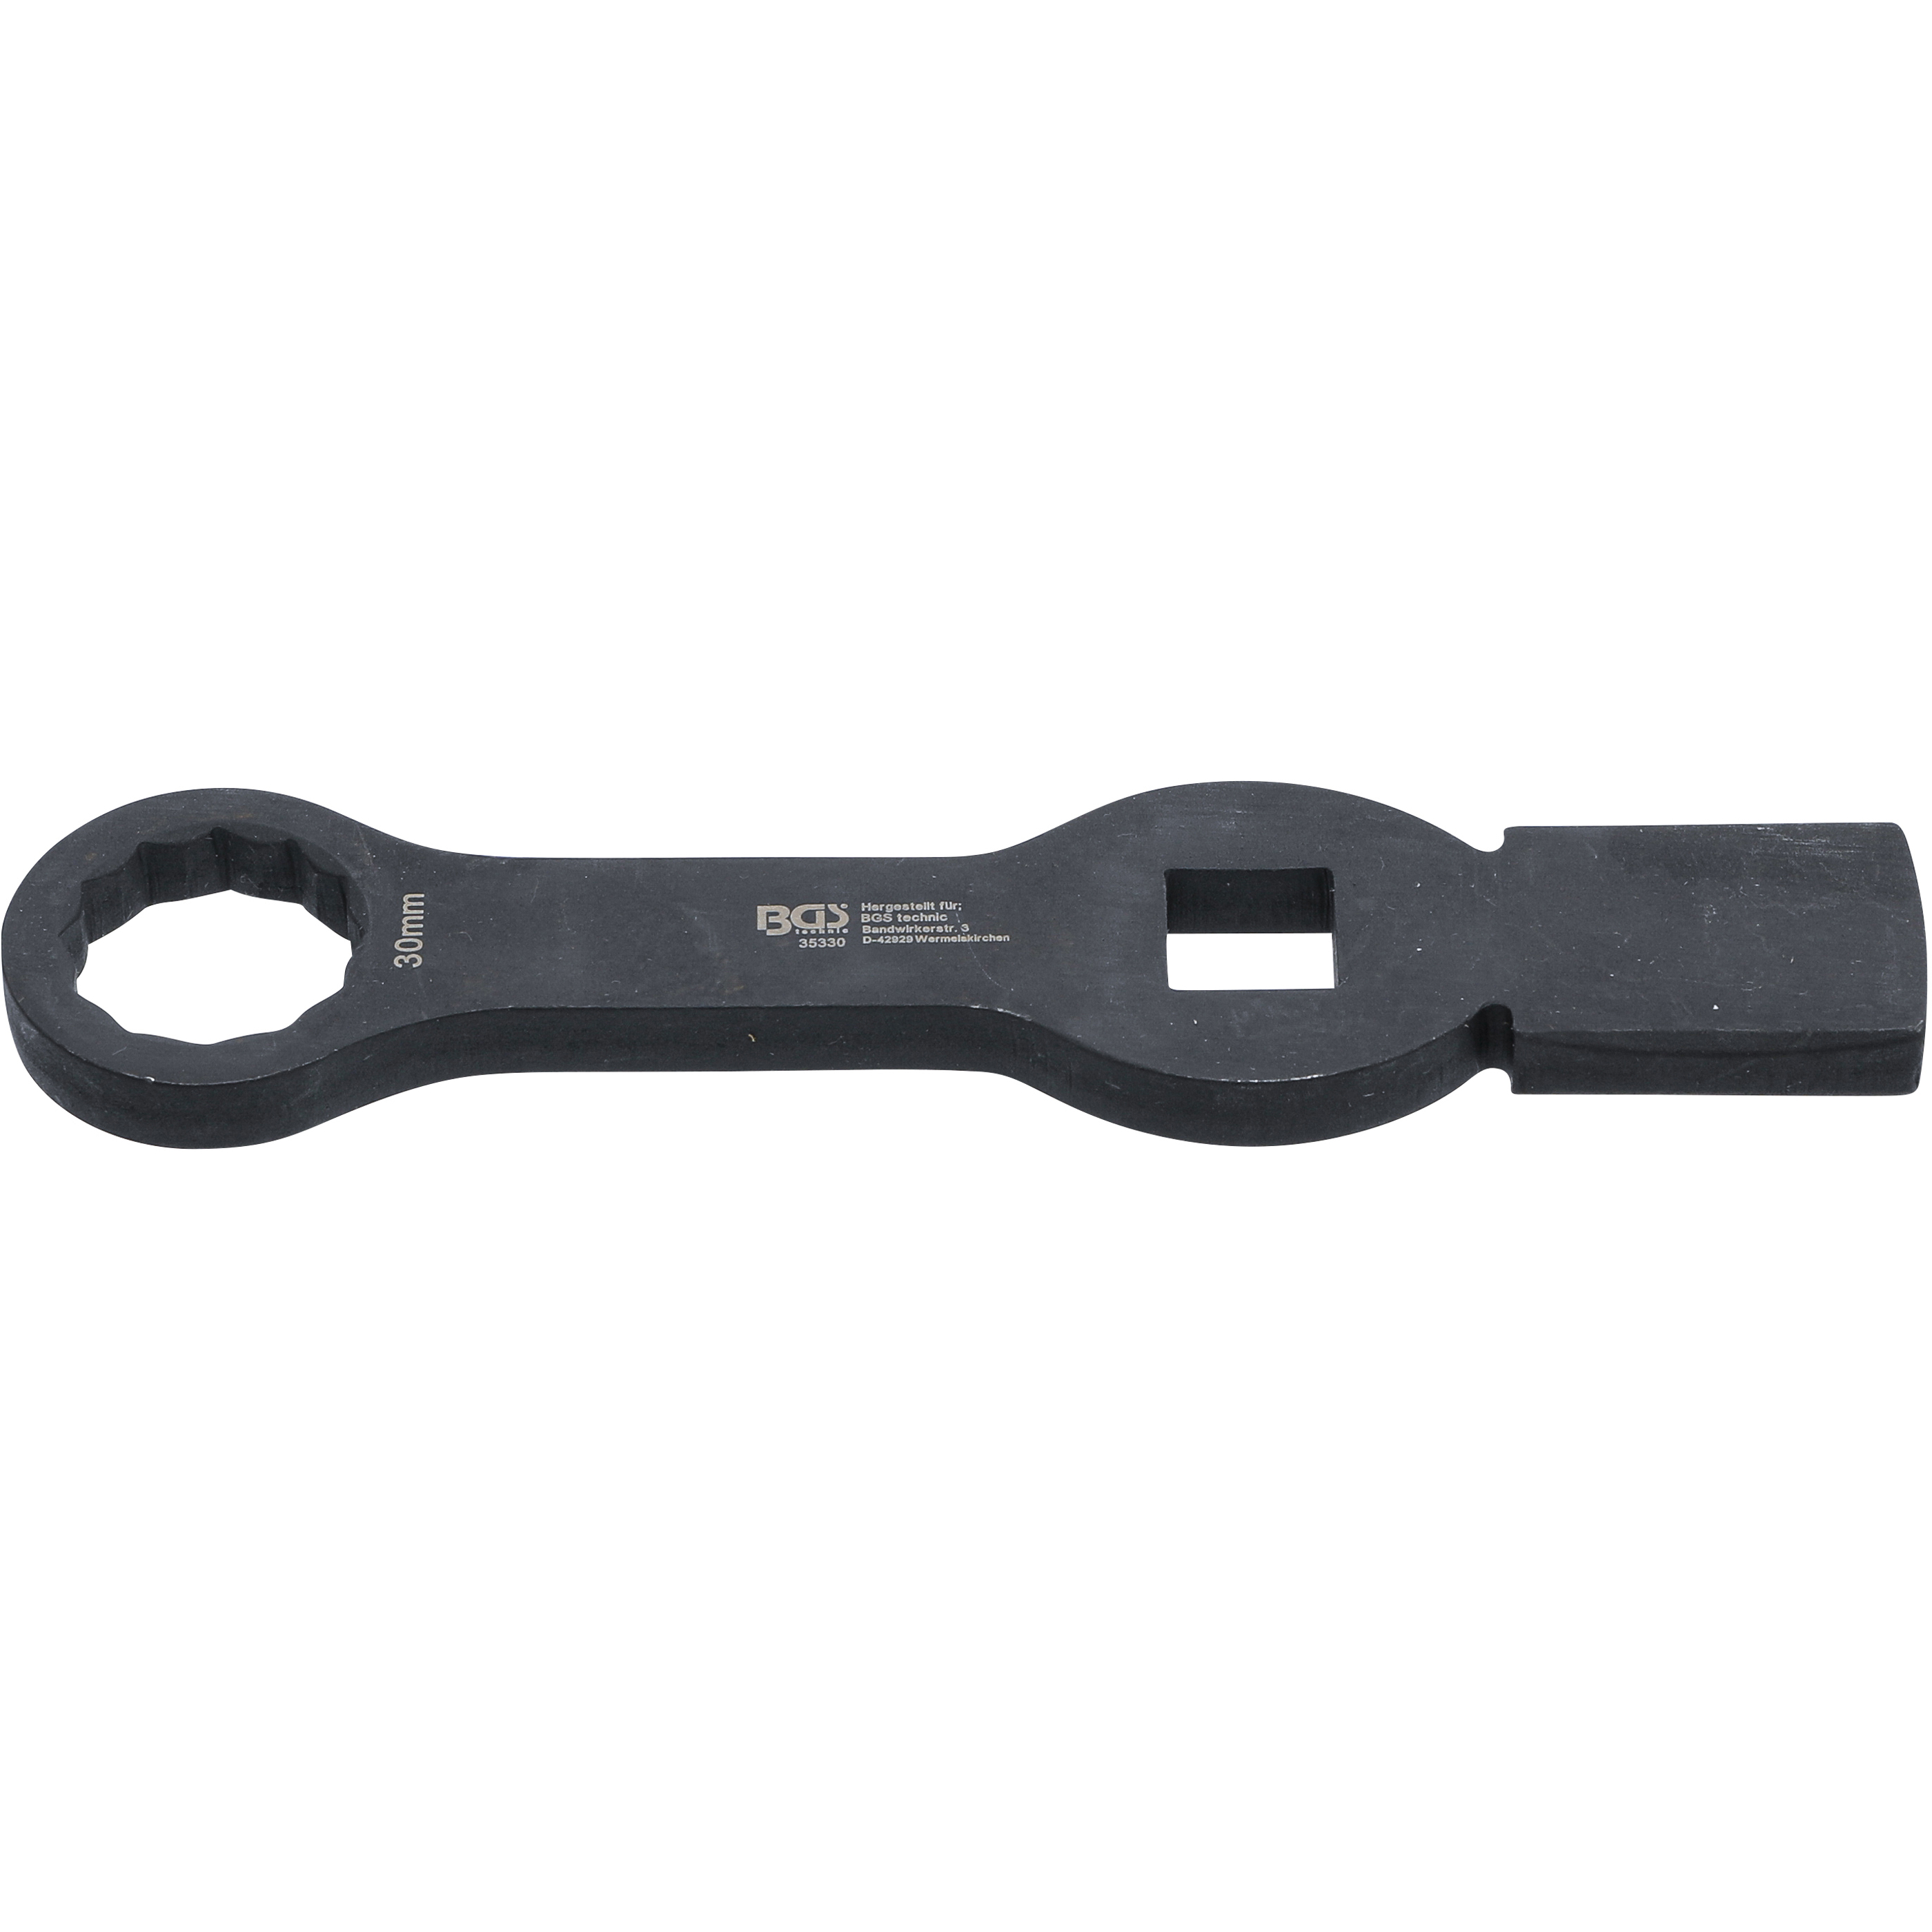 Spark Resistant Tools Slogging Ring Spanner 50mm, DIN 7444, Atex - China  Non-Sparking Tools, Single Ring End Hammer Wrench | Made-in-China.com